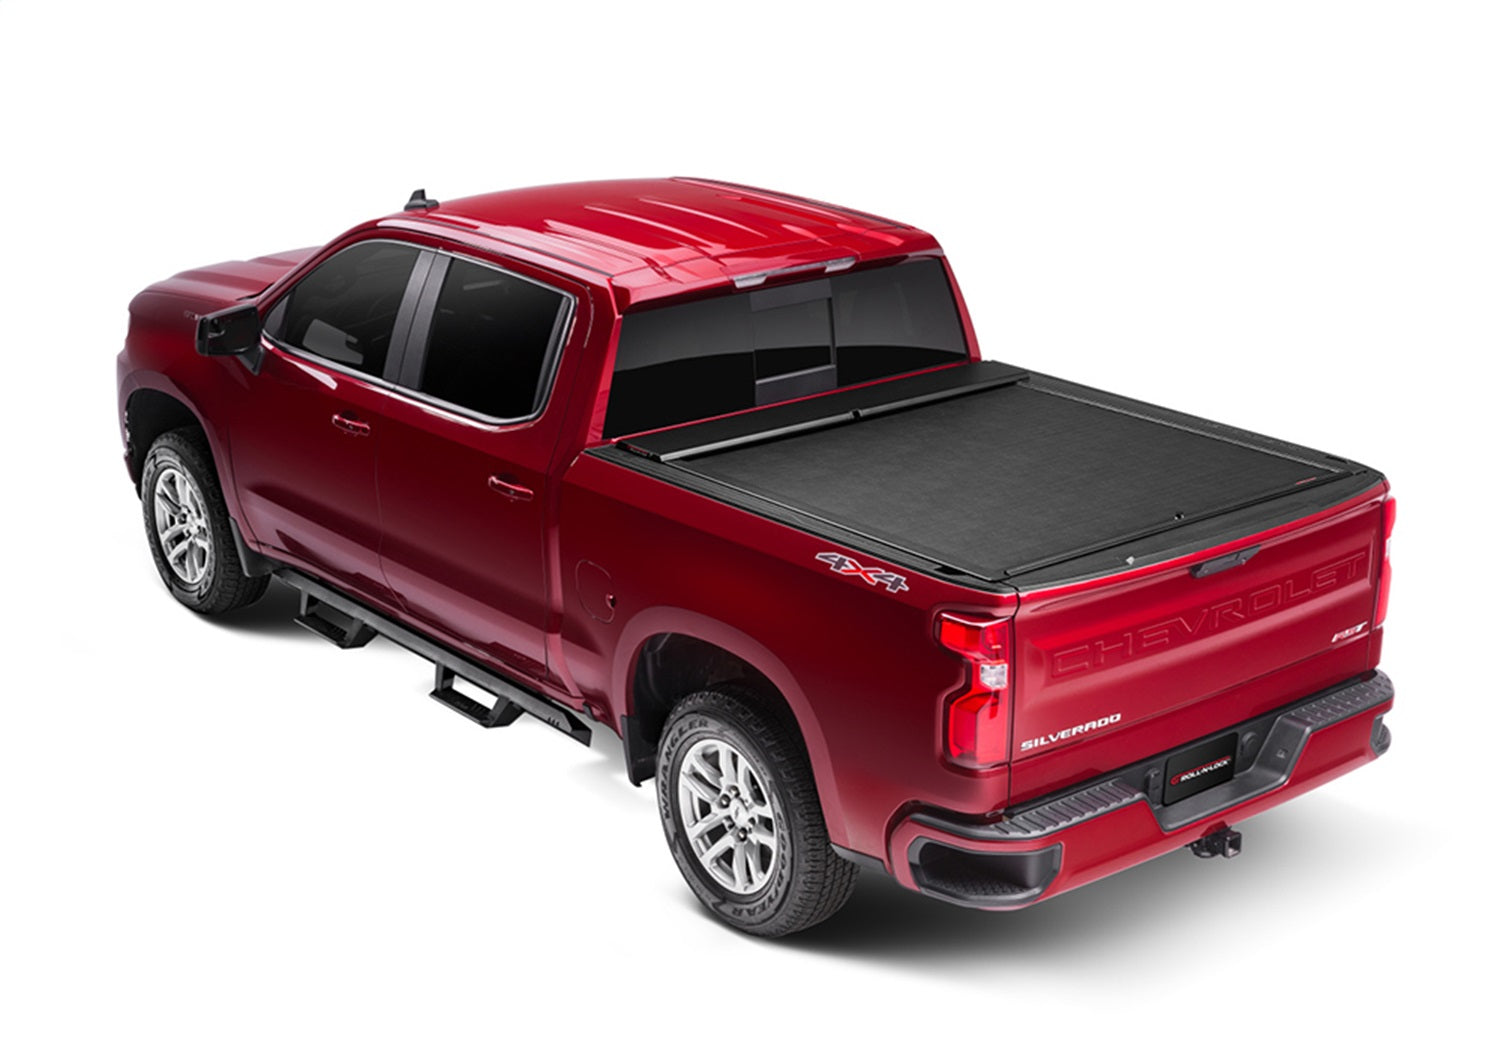 Roll-N-Lock LG261M Roll-N-Lock M-Series Truck Bed Cover Fits Canyon Colorado